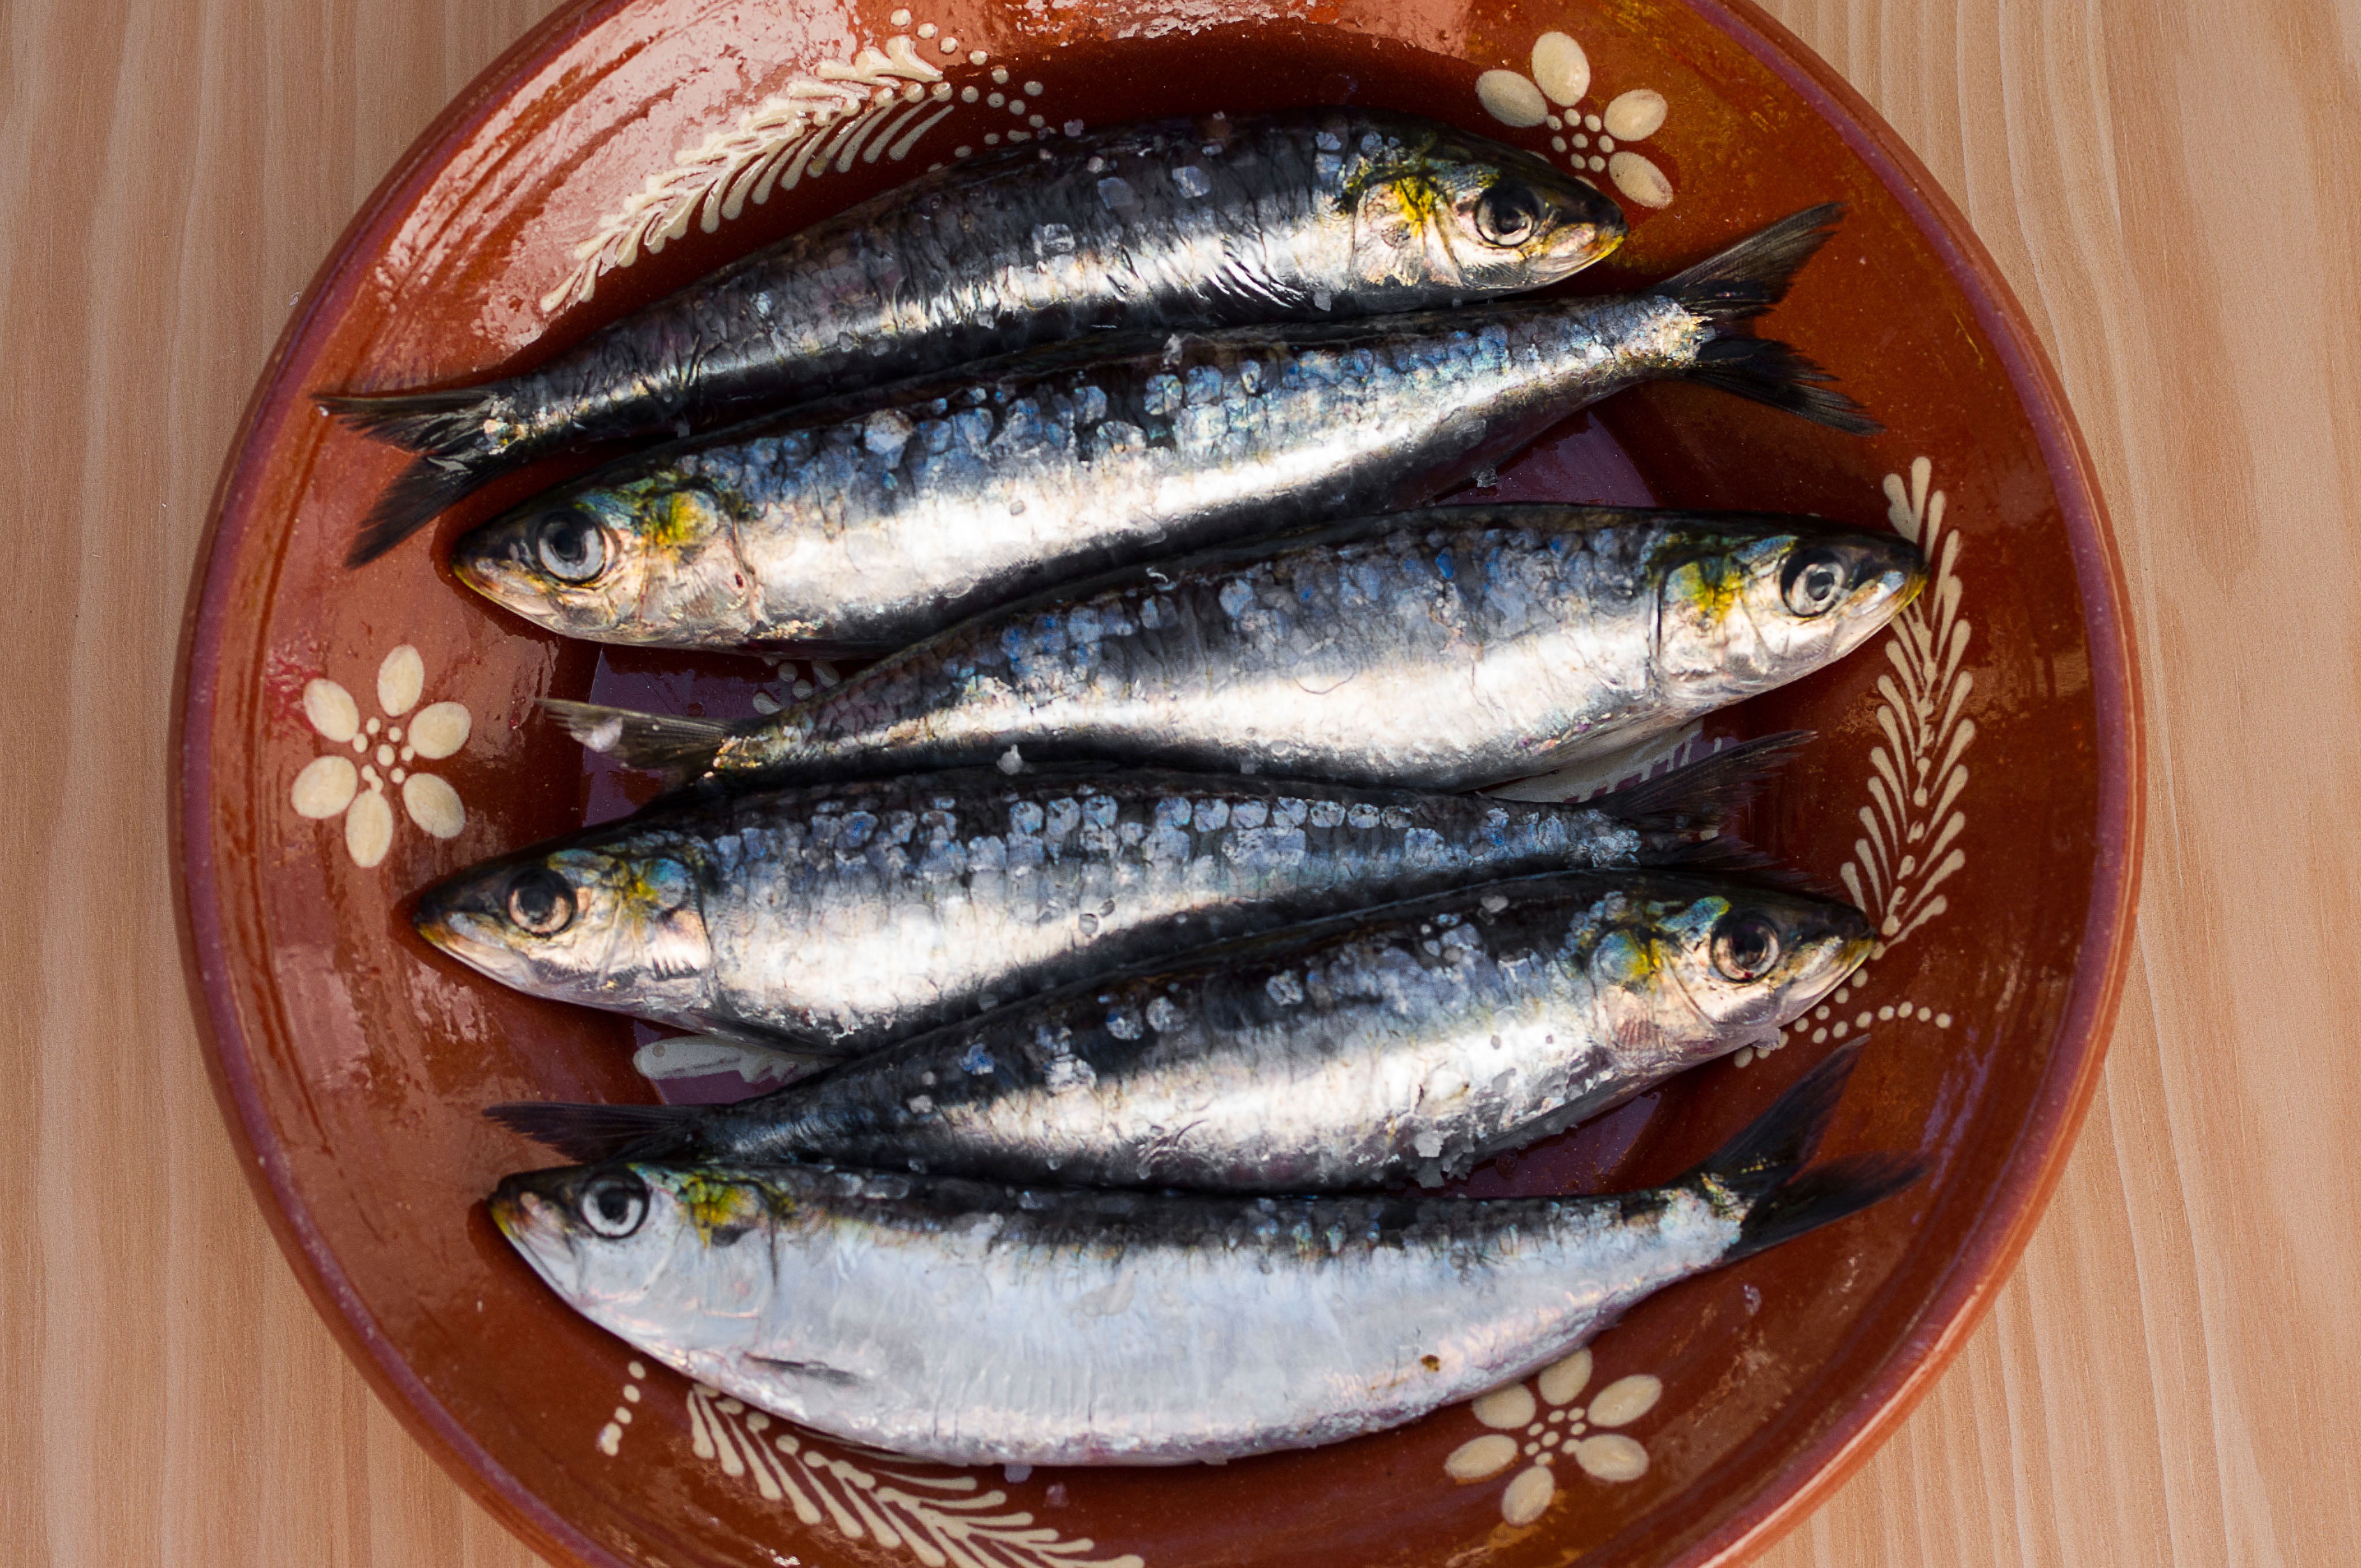 Sardines have lost around two-thirds of their mass in the last decade